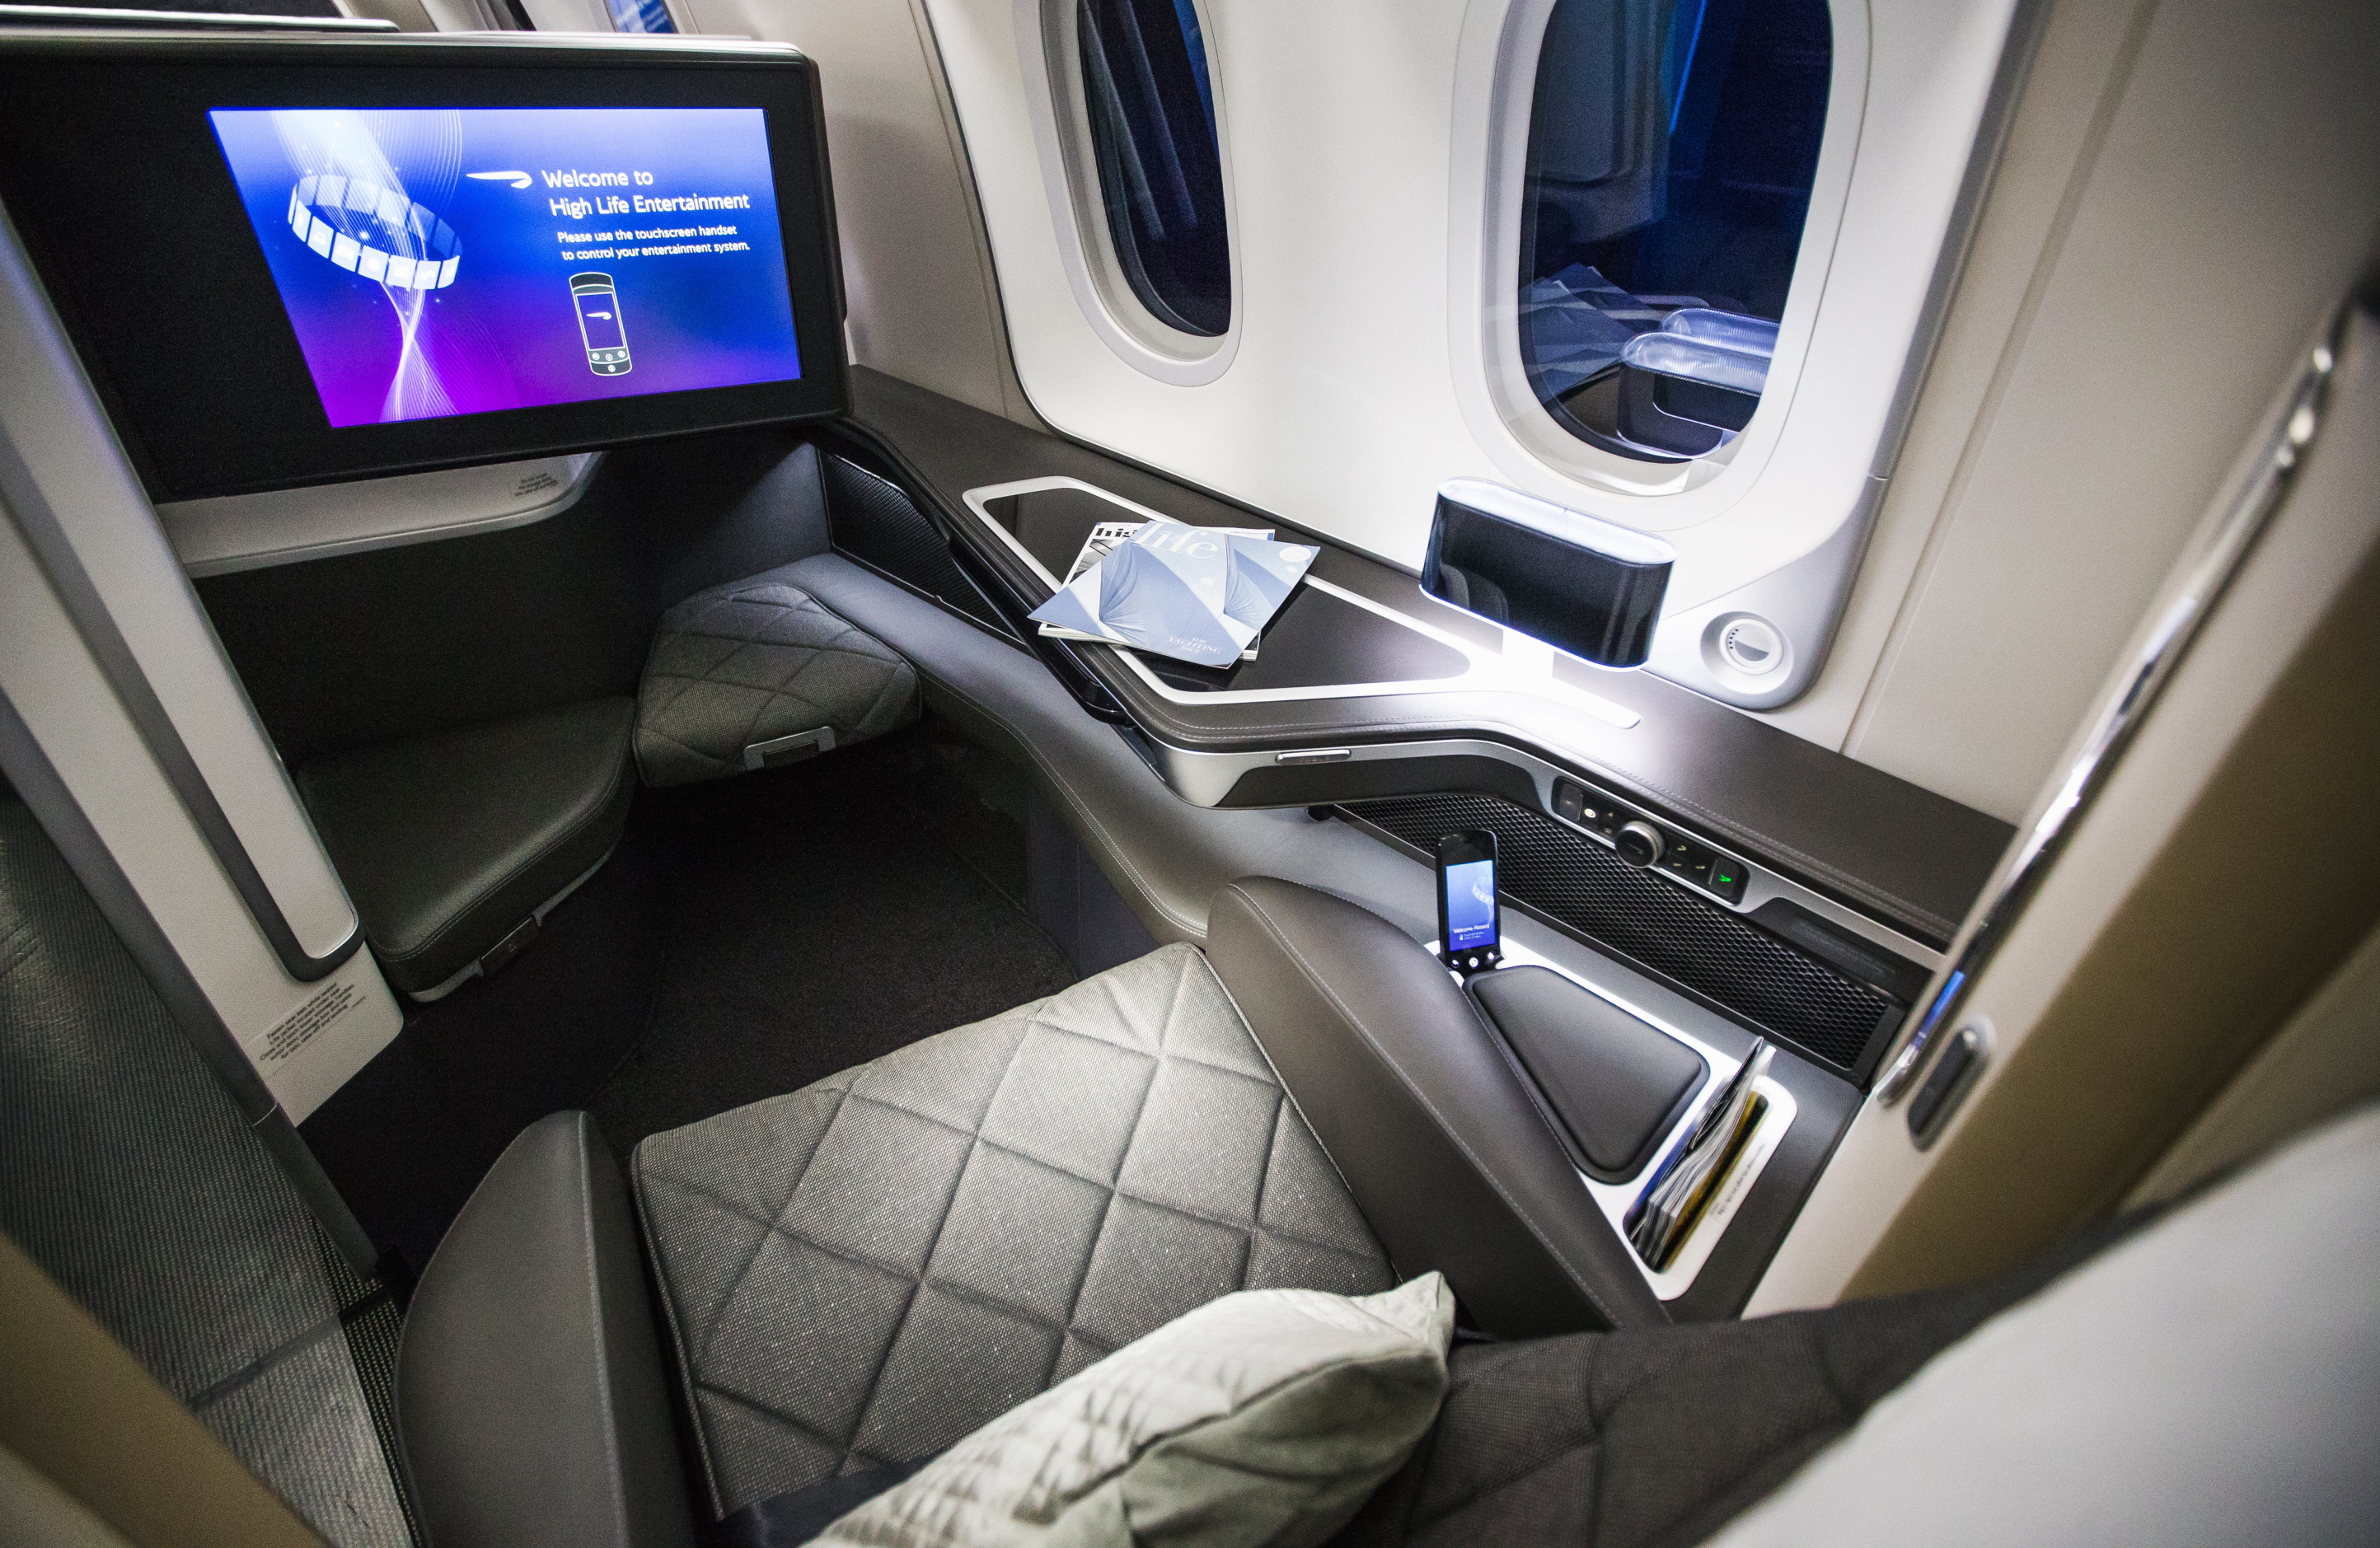 New British Airways First Class Seat - Boeing 787-9. Click to enlarge.